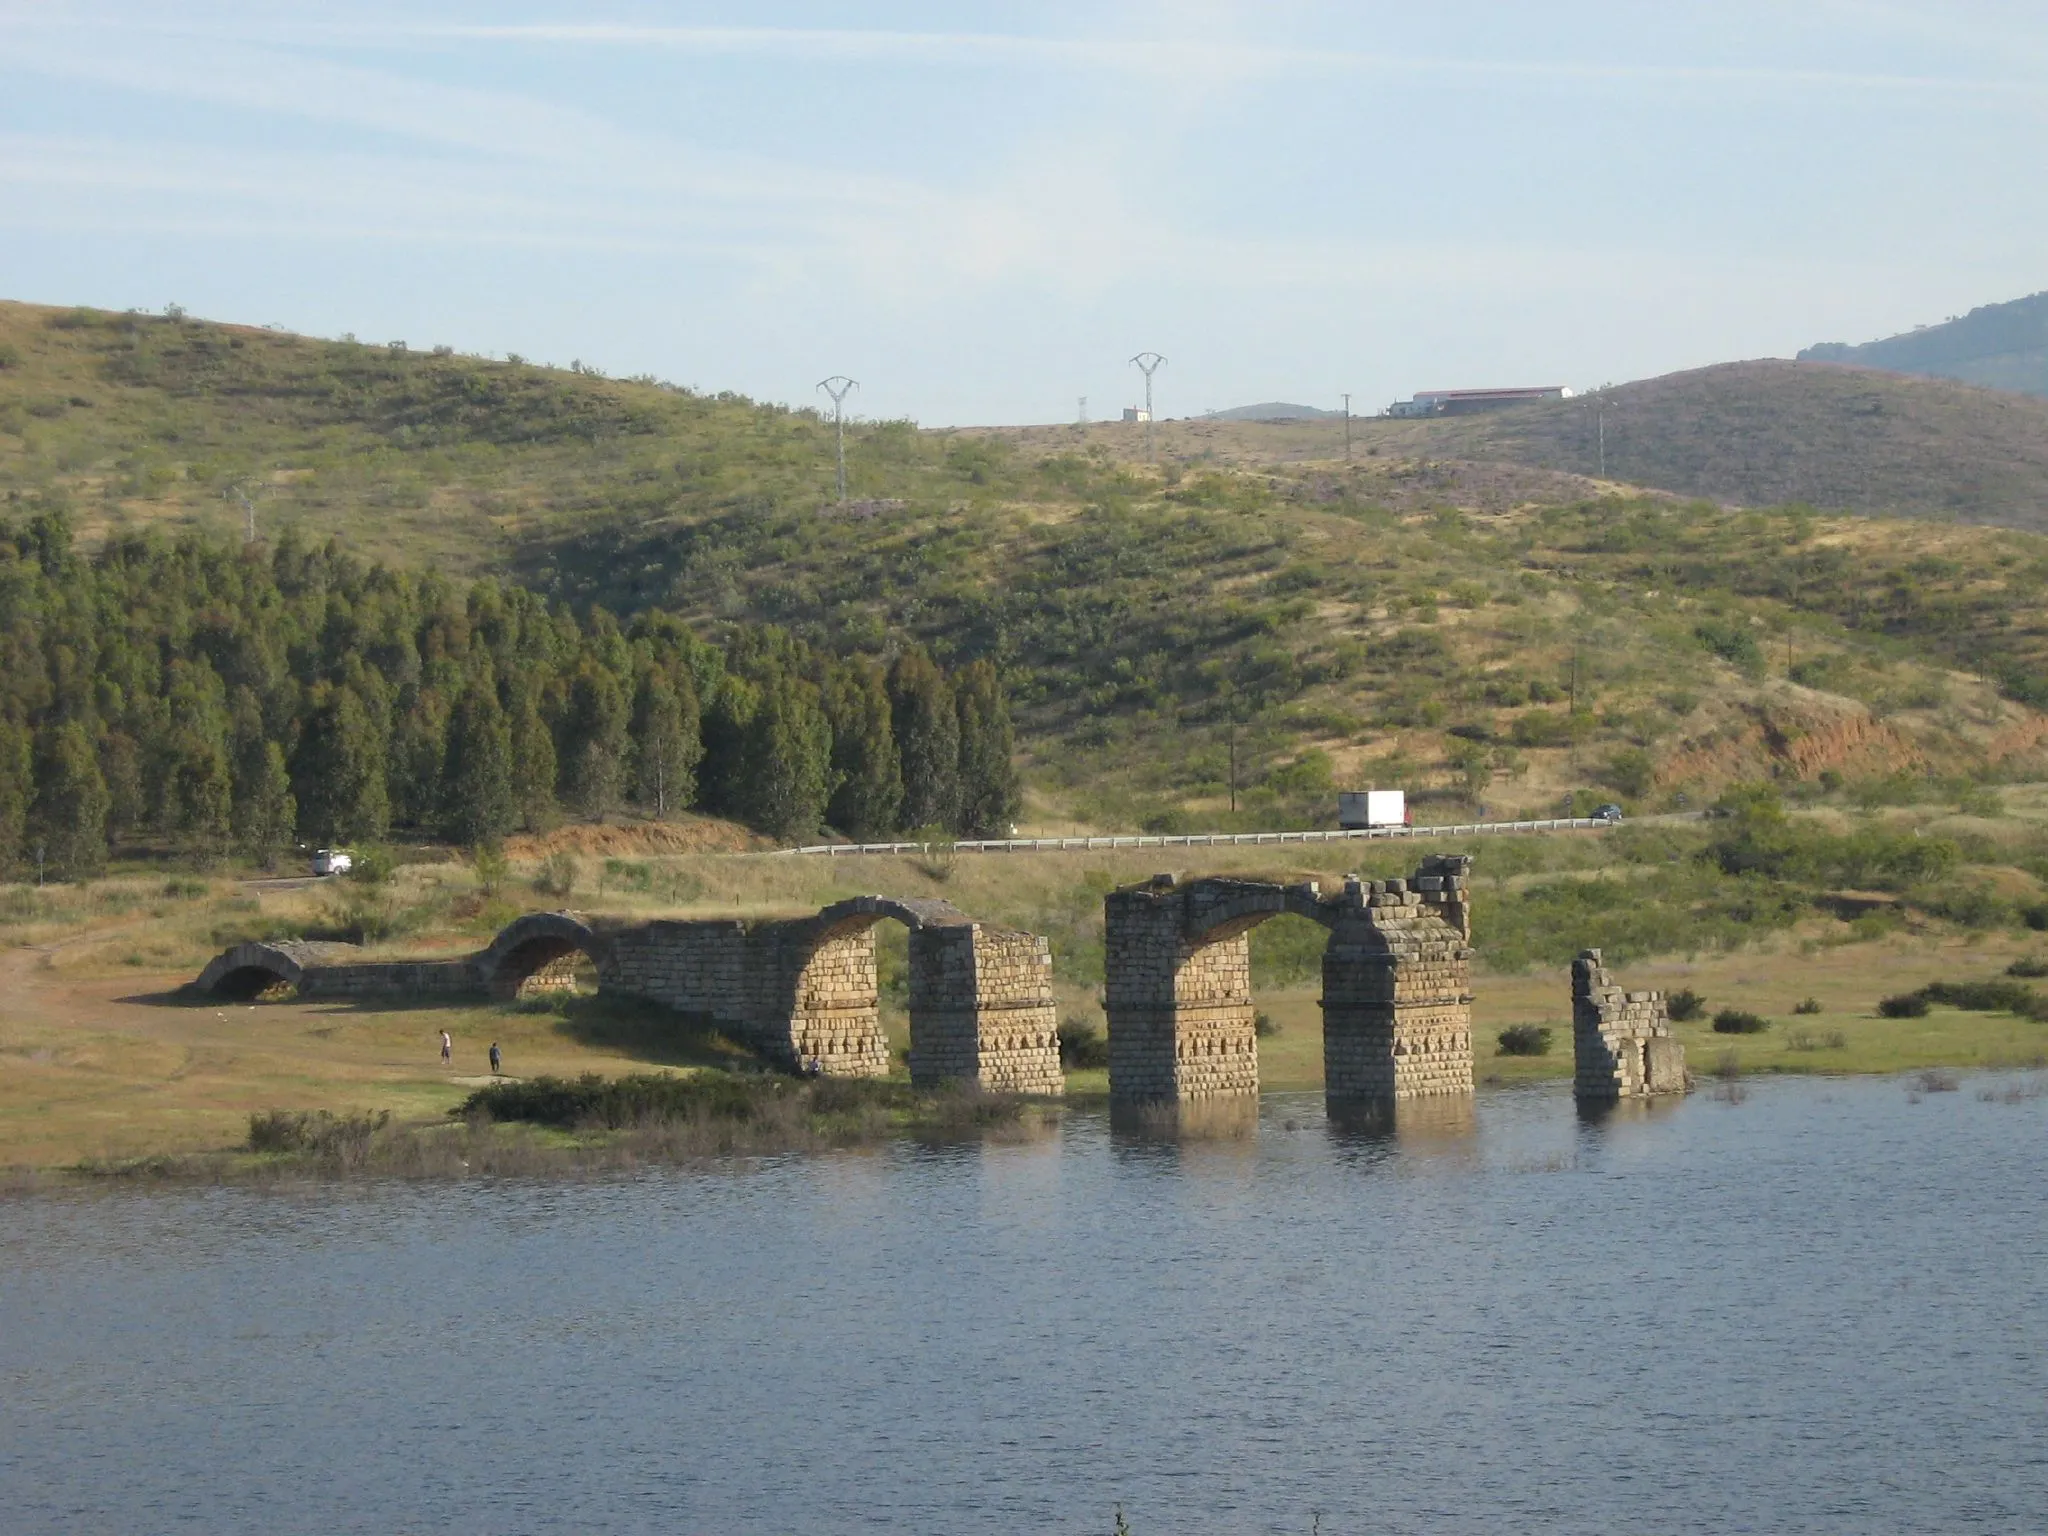 Photo showing: The remains of the Roman Puente de Alconétar (Alconétar Bridge), Cáceres Province, Spain. The ancient segmental arch bridge originally crossed the Tajo river near the village of Garrovillas. In 1972, during the construction of the Alcántara reservoir, the structure was moved 6 km upstream to its current location.